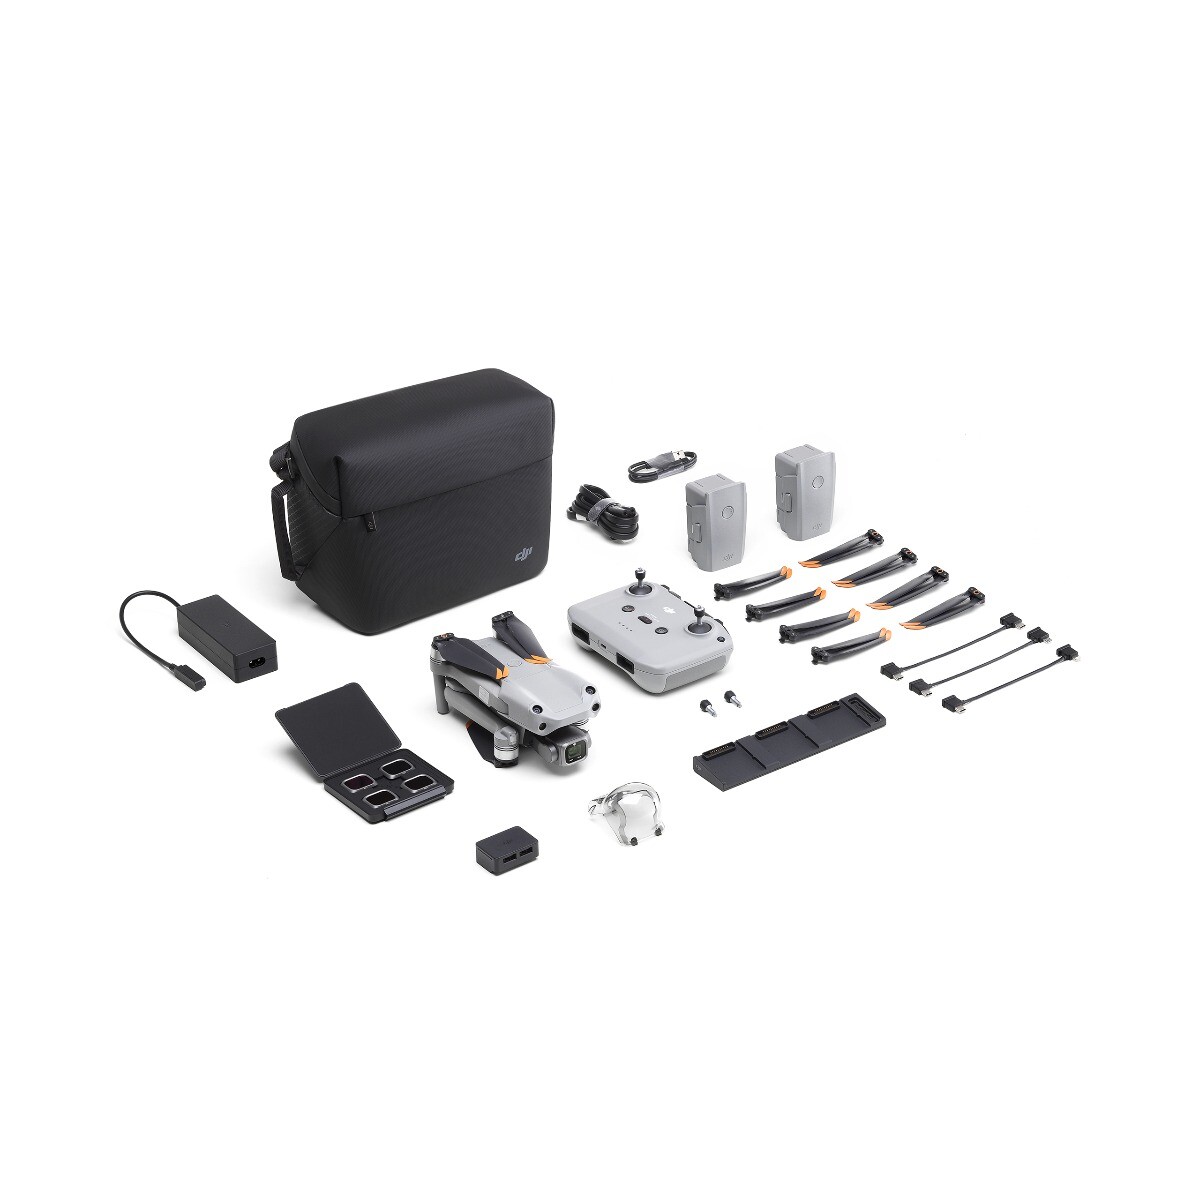 DJI Air 2S Drone - Fly More Combo